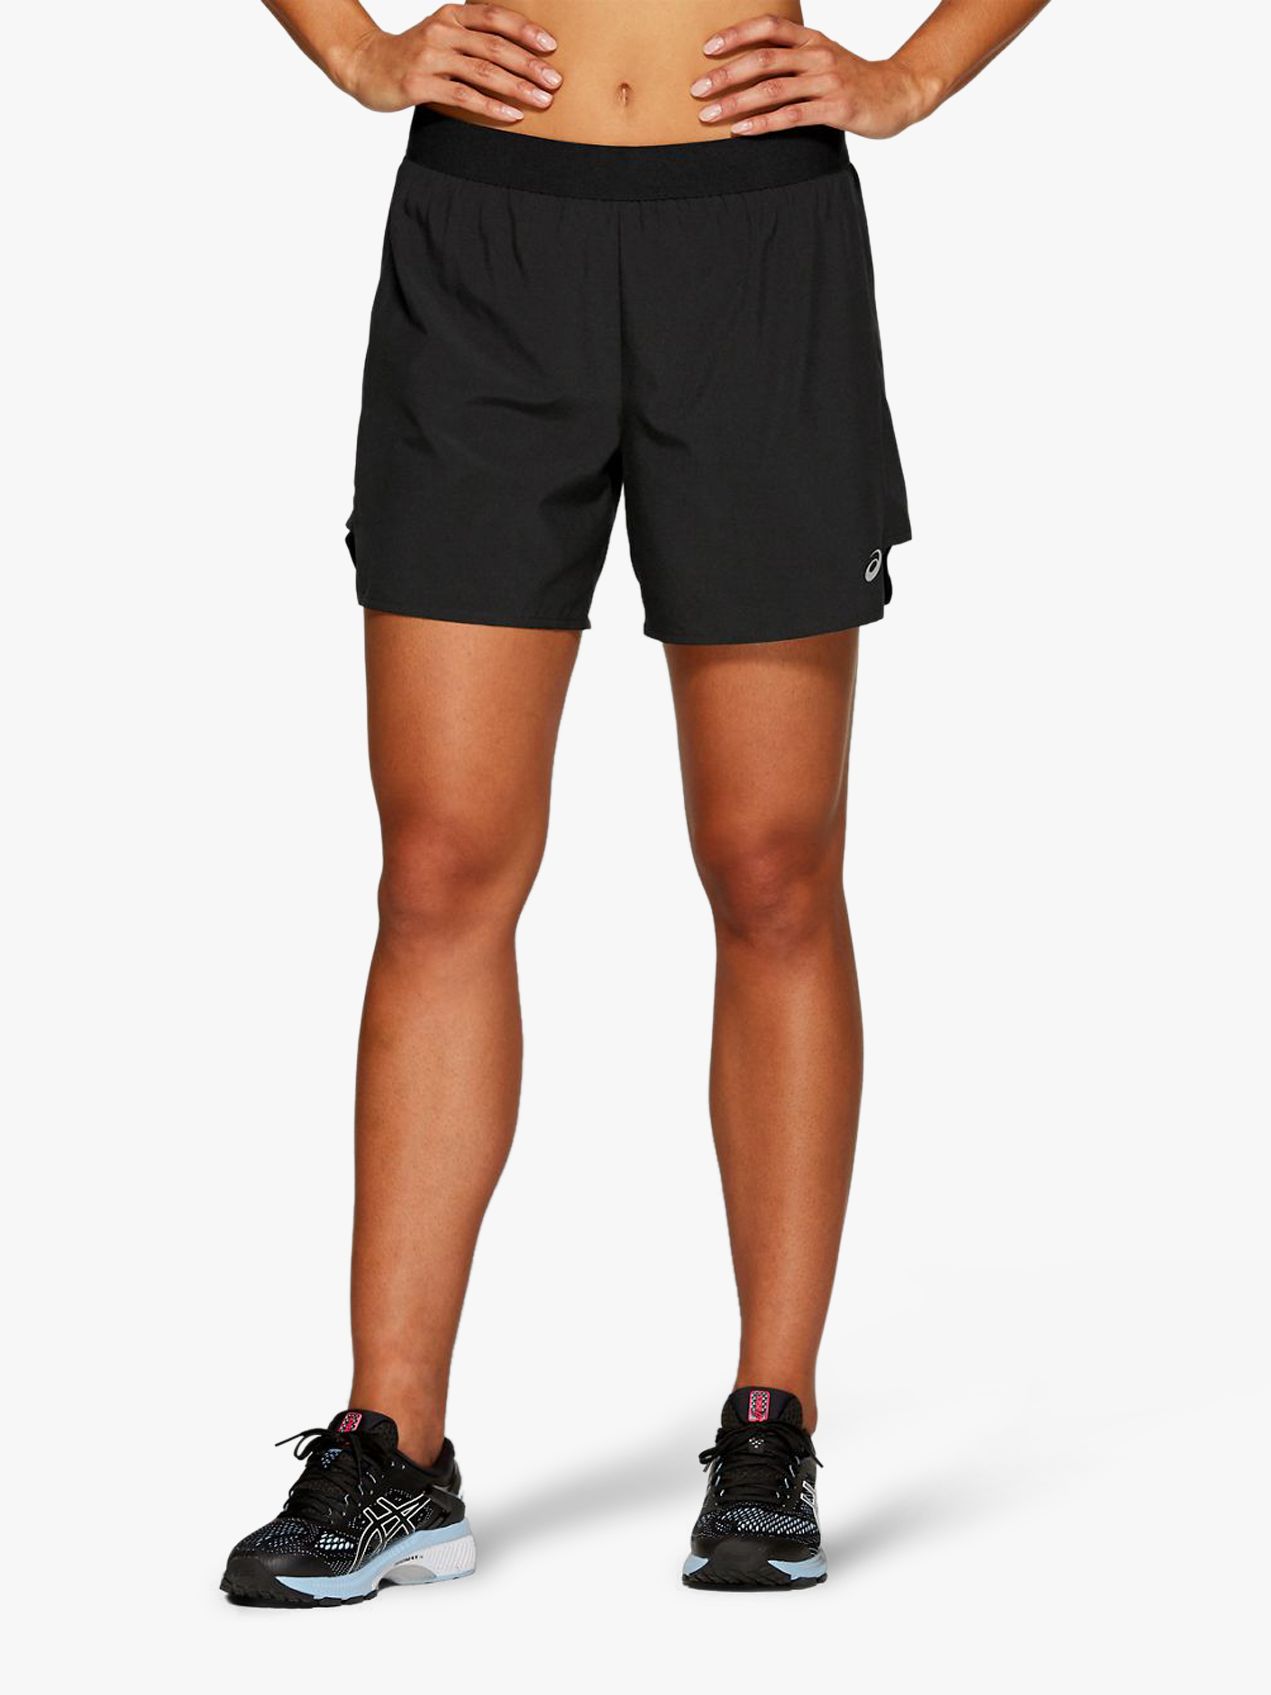 más Polvoriento Terapia Asics Shorts 2 In 1 on Sale, SAVE 55%.